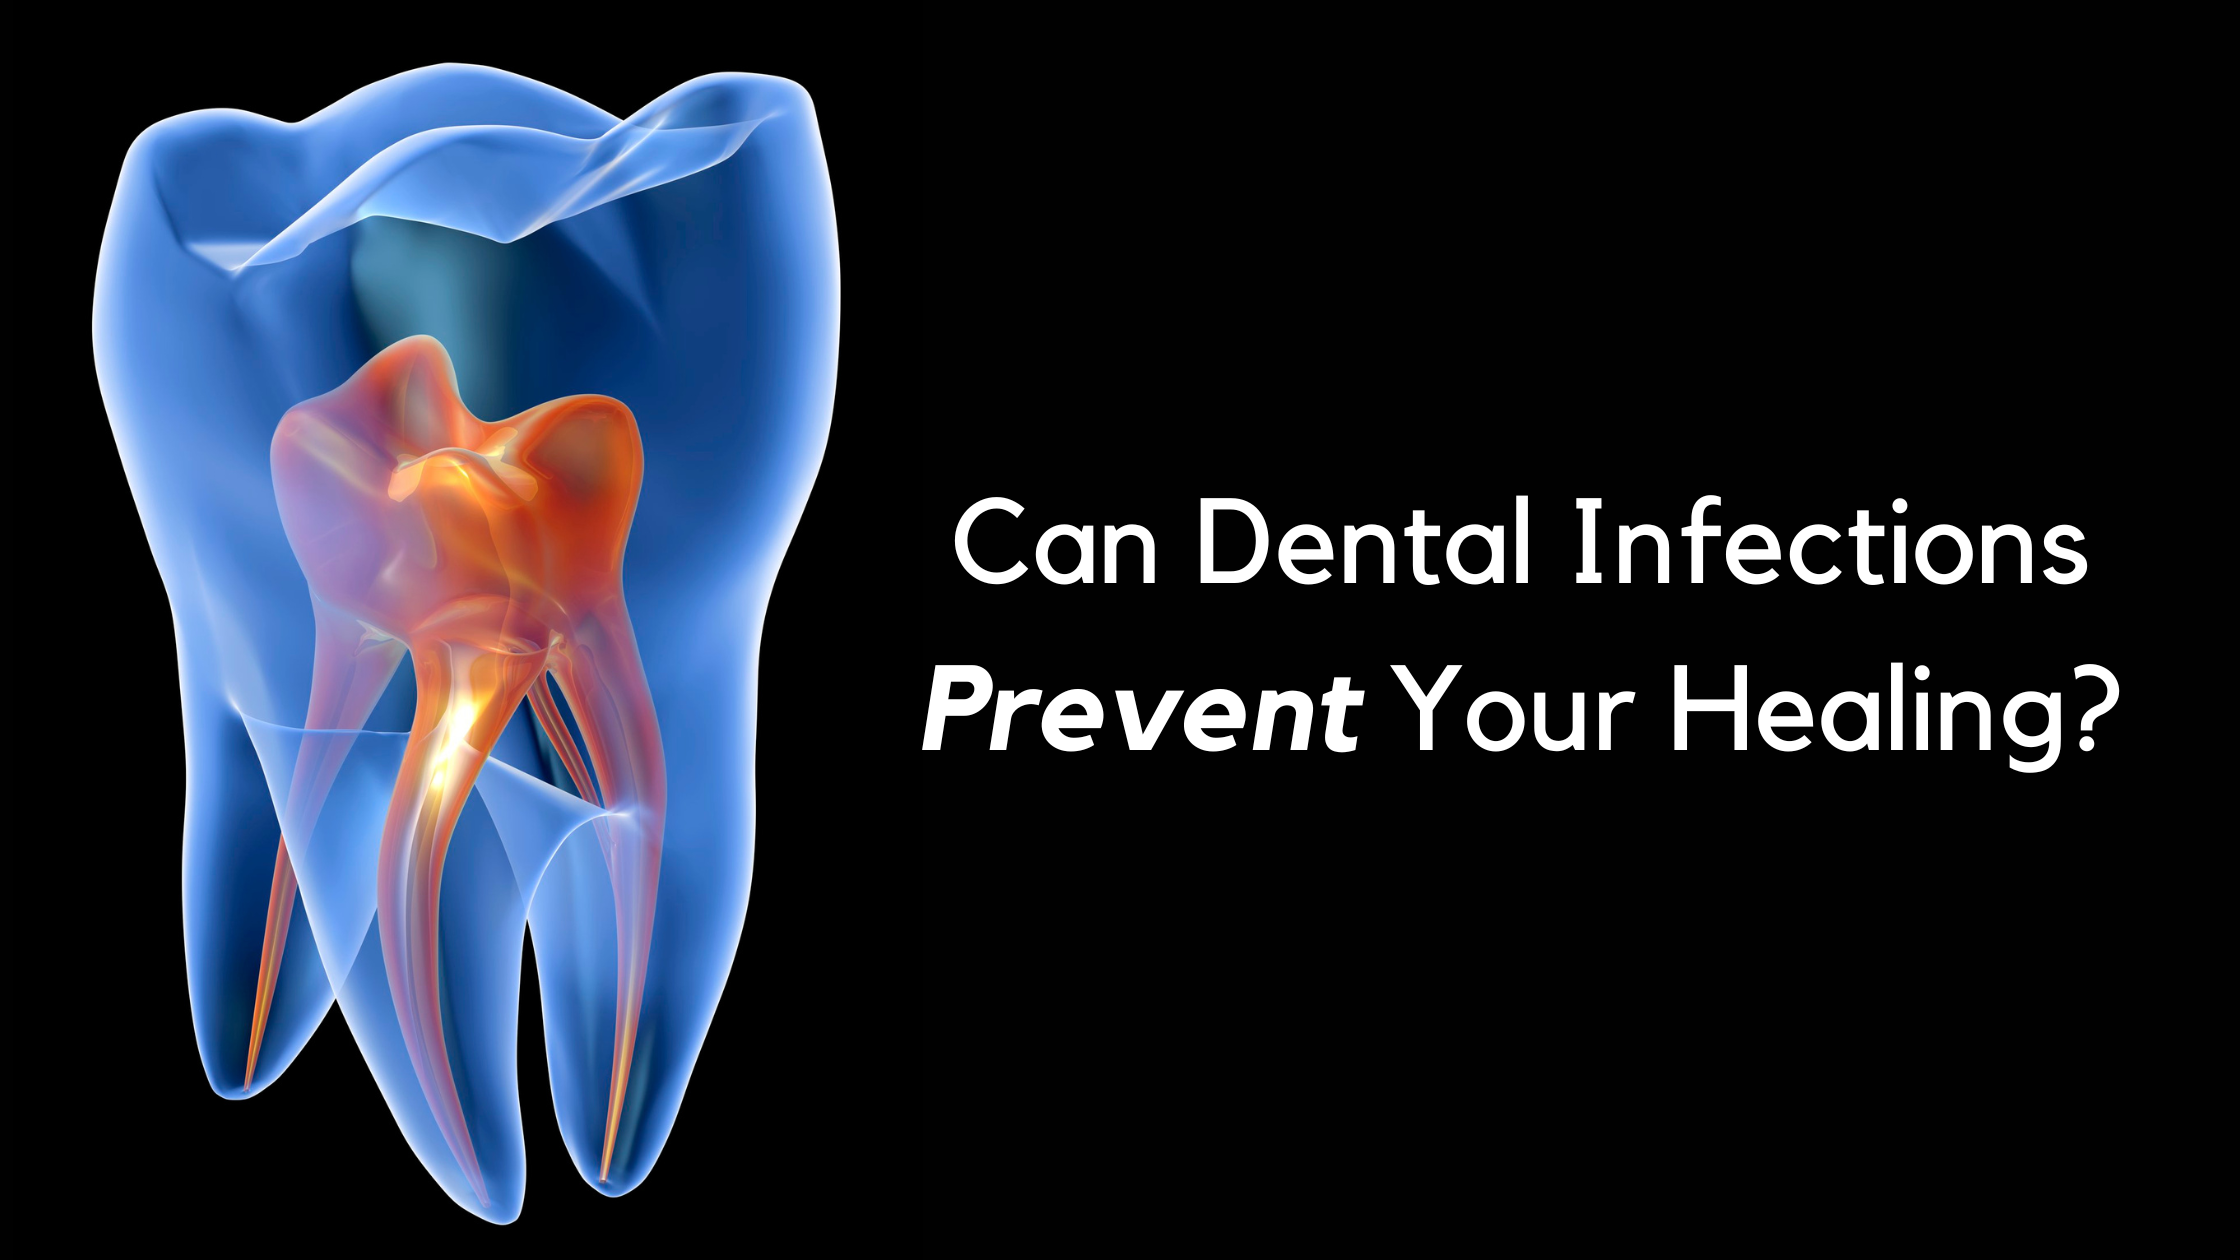 can dental infections prevent healing?